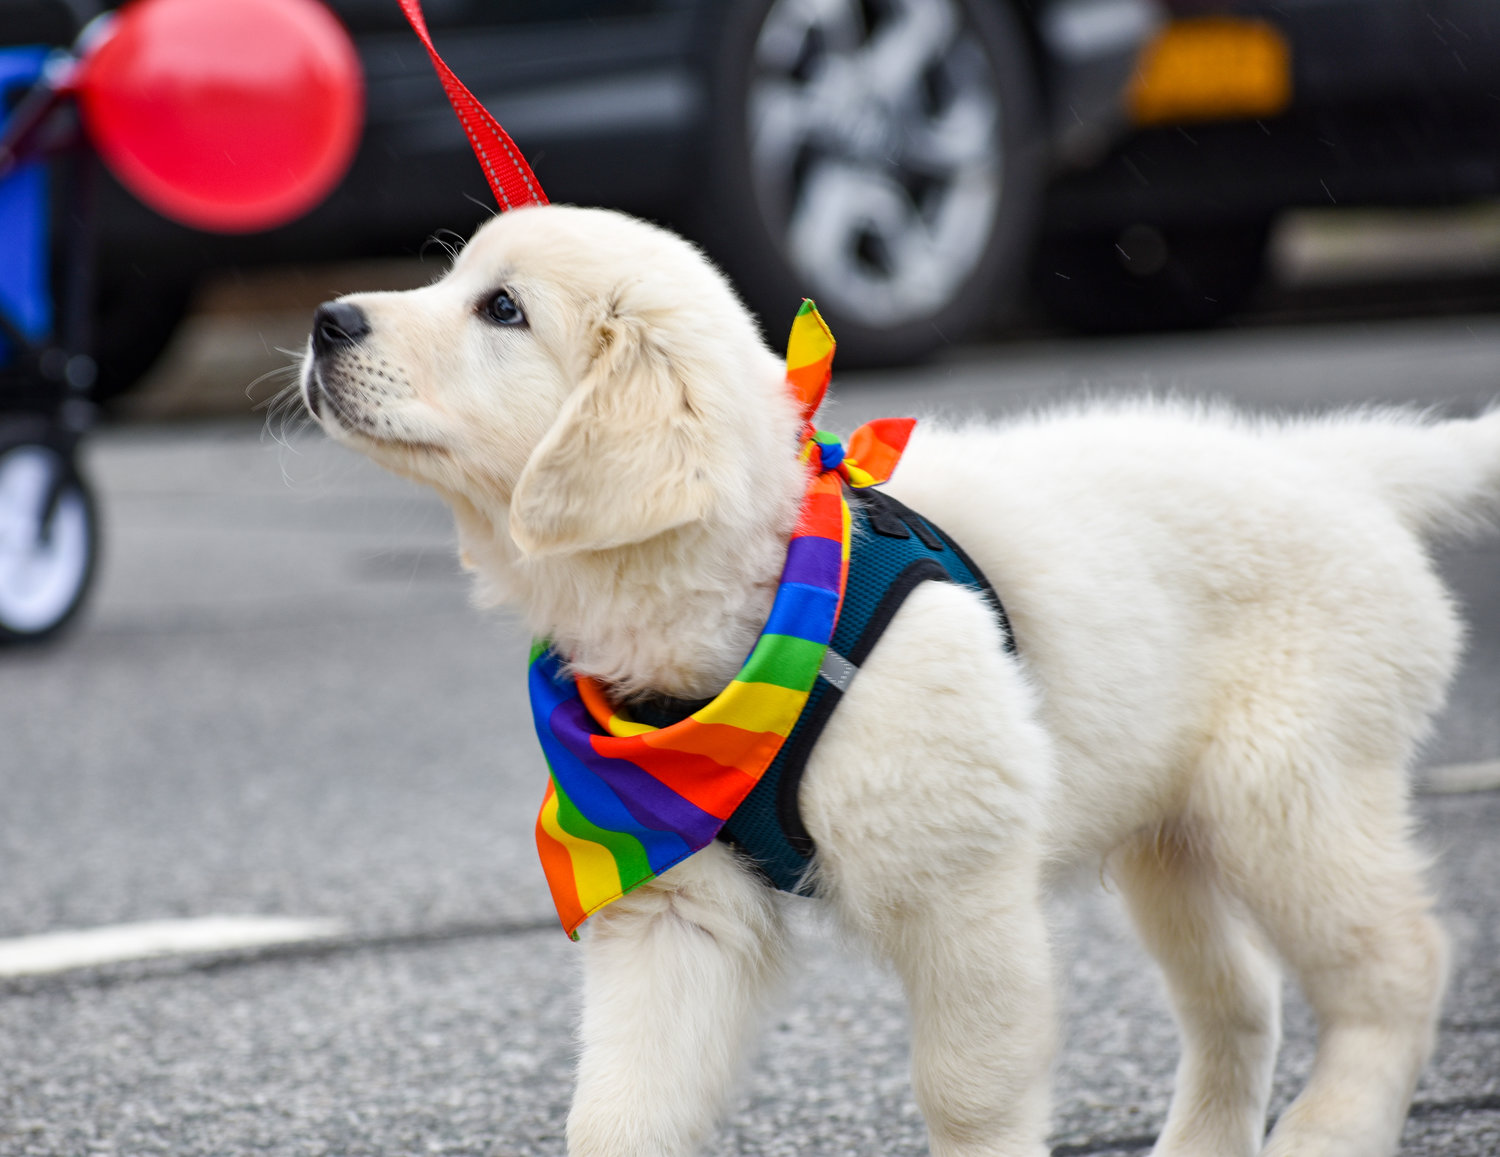 A pup struts down Albany Street while wearing a rainbow bandana to show support for the LGBTQ community.